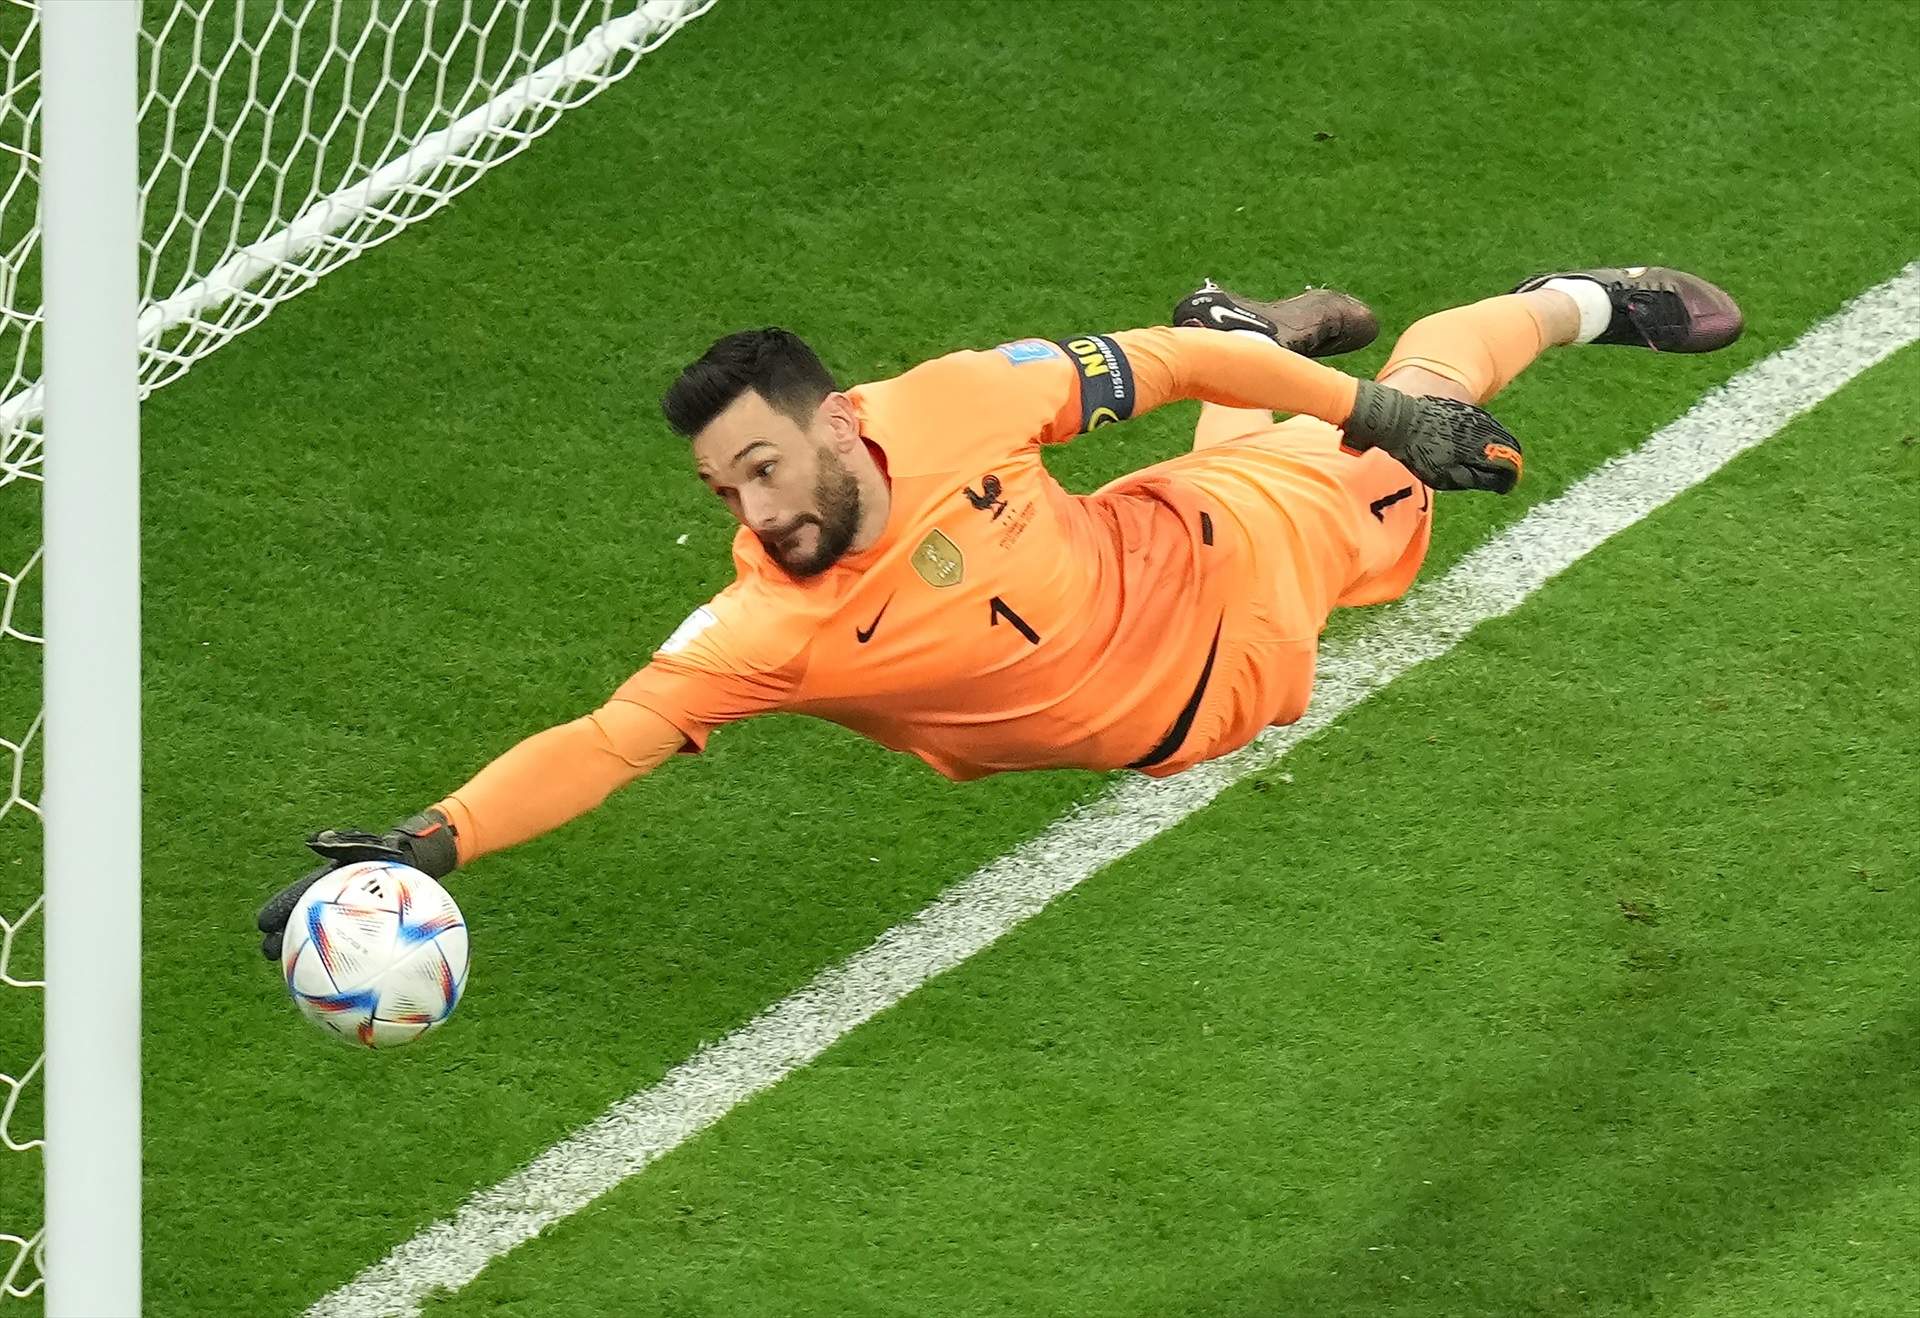 10 December 2022, Qatar, Al Khor: France goalkeeper Hugo Lloris saves a shot from England's Harry Maguire during the FIFA World Cup Qatar 2022 Quarter-Final soccer match between England and France at the Al Bayt Stadium. Photo: Peter Byrne/PA Wire/dpa